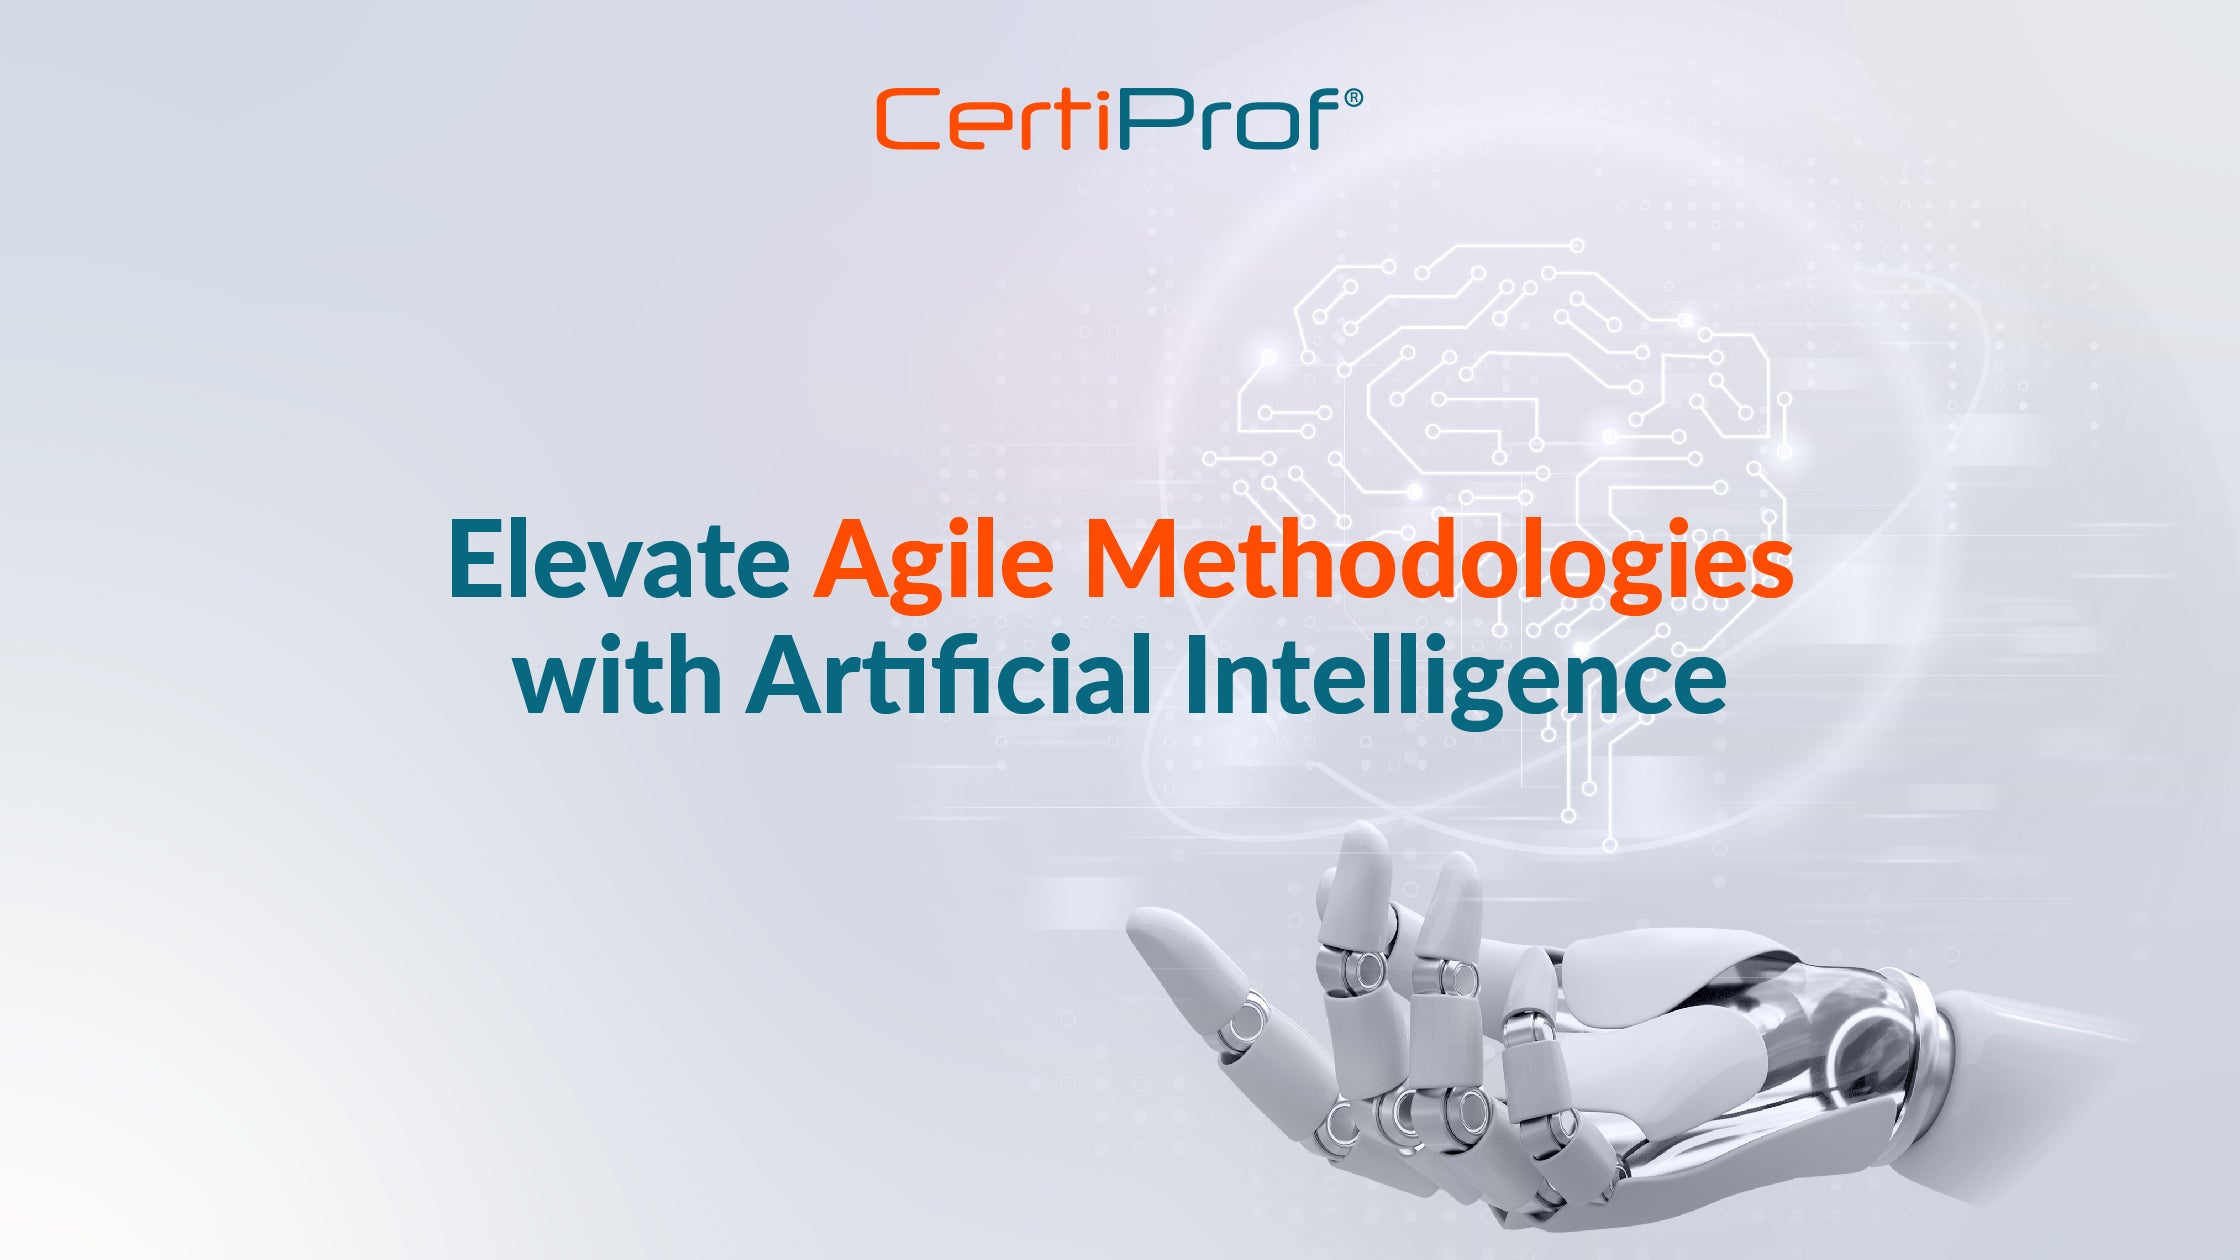 Elevate Agile Methodologies with Artificial Intelligence